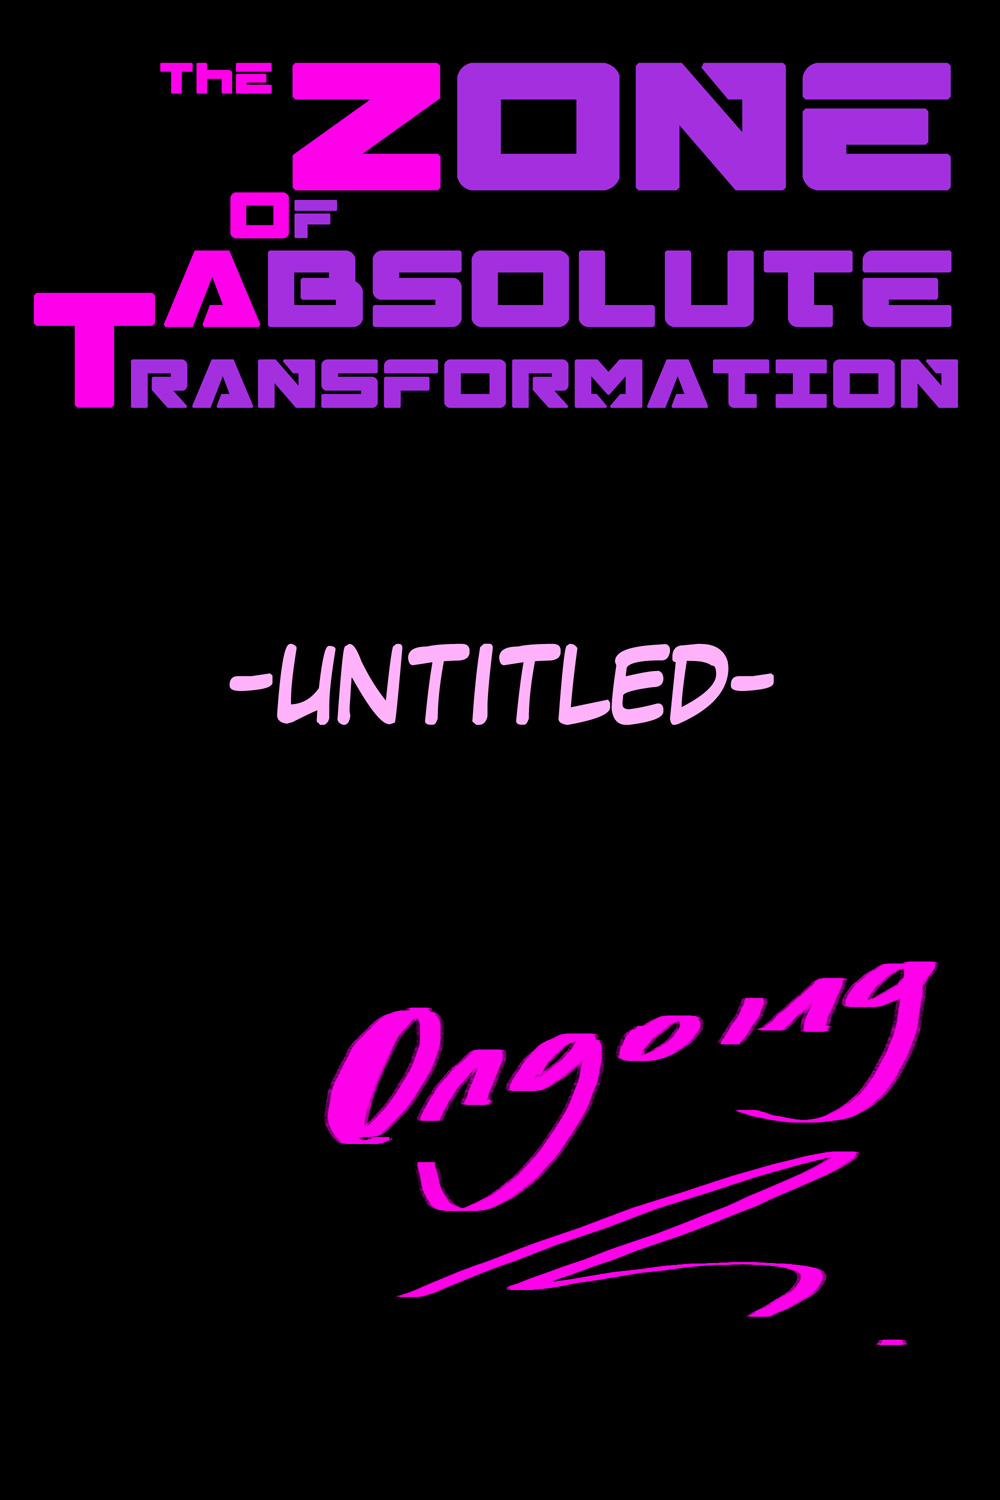 The Zone of Absolute Transformation from Kannel Update